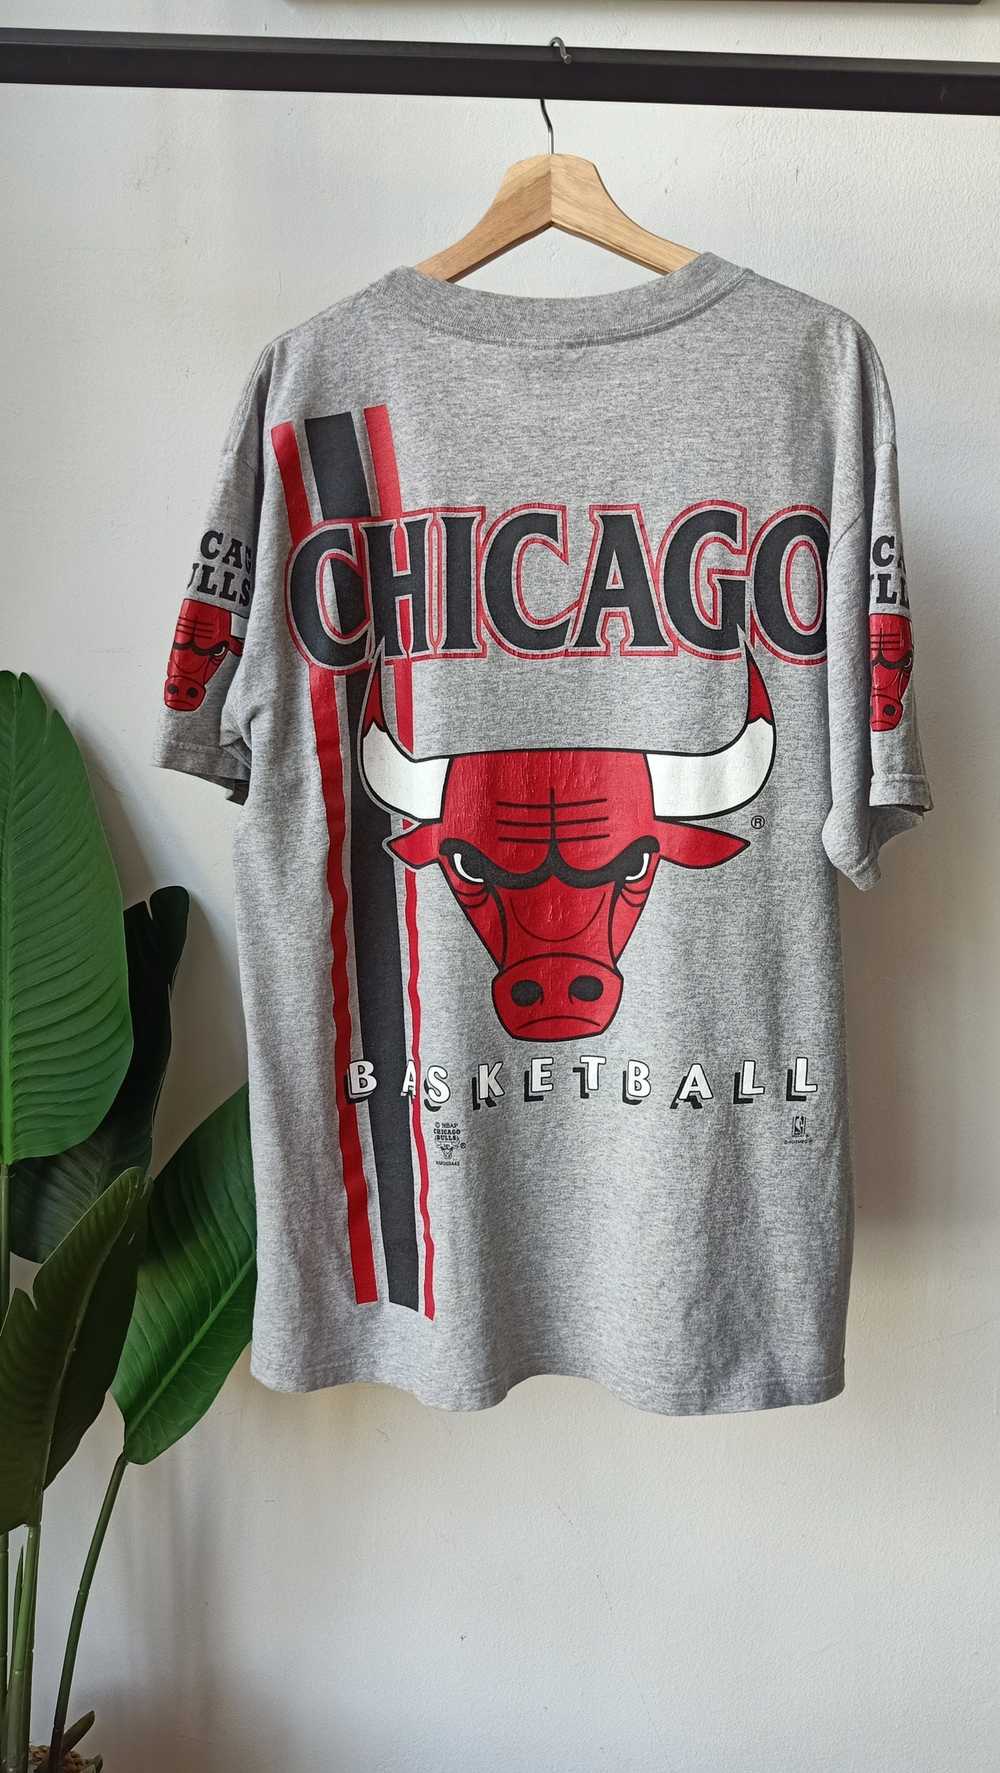 Vintage Lee Sport Chicago Bulls NBA graphic T-Shirt Youth XL Adult